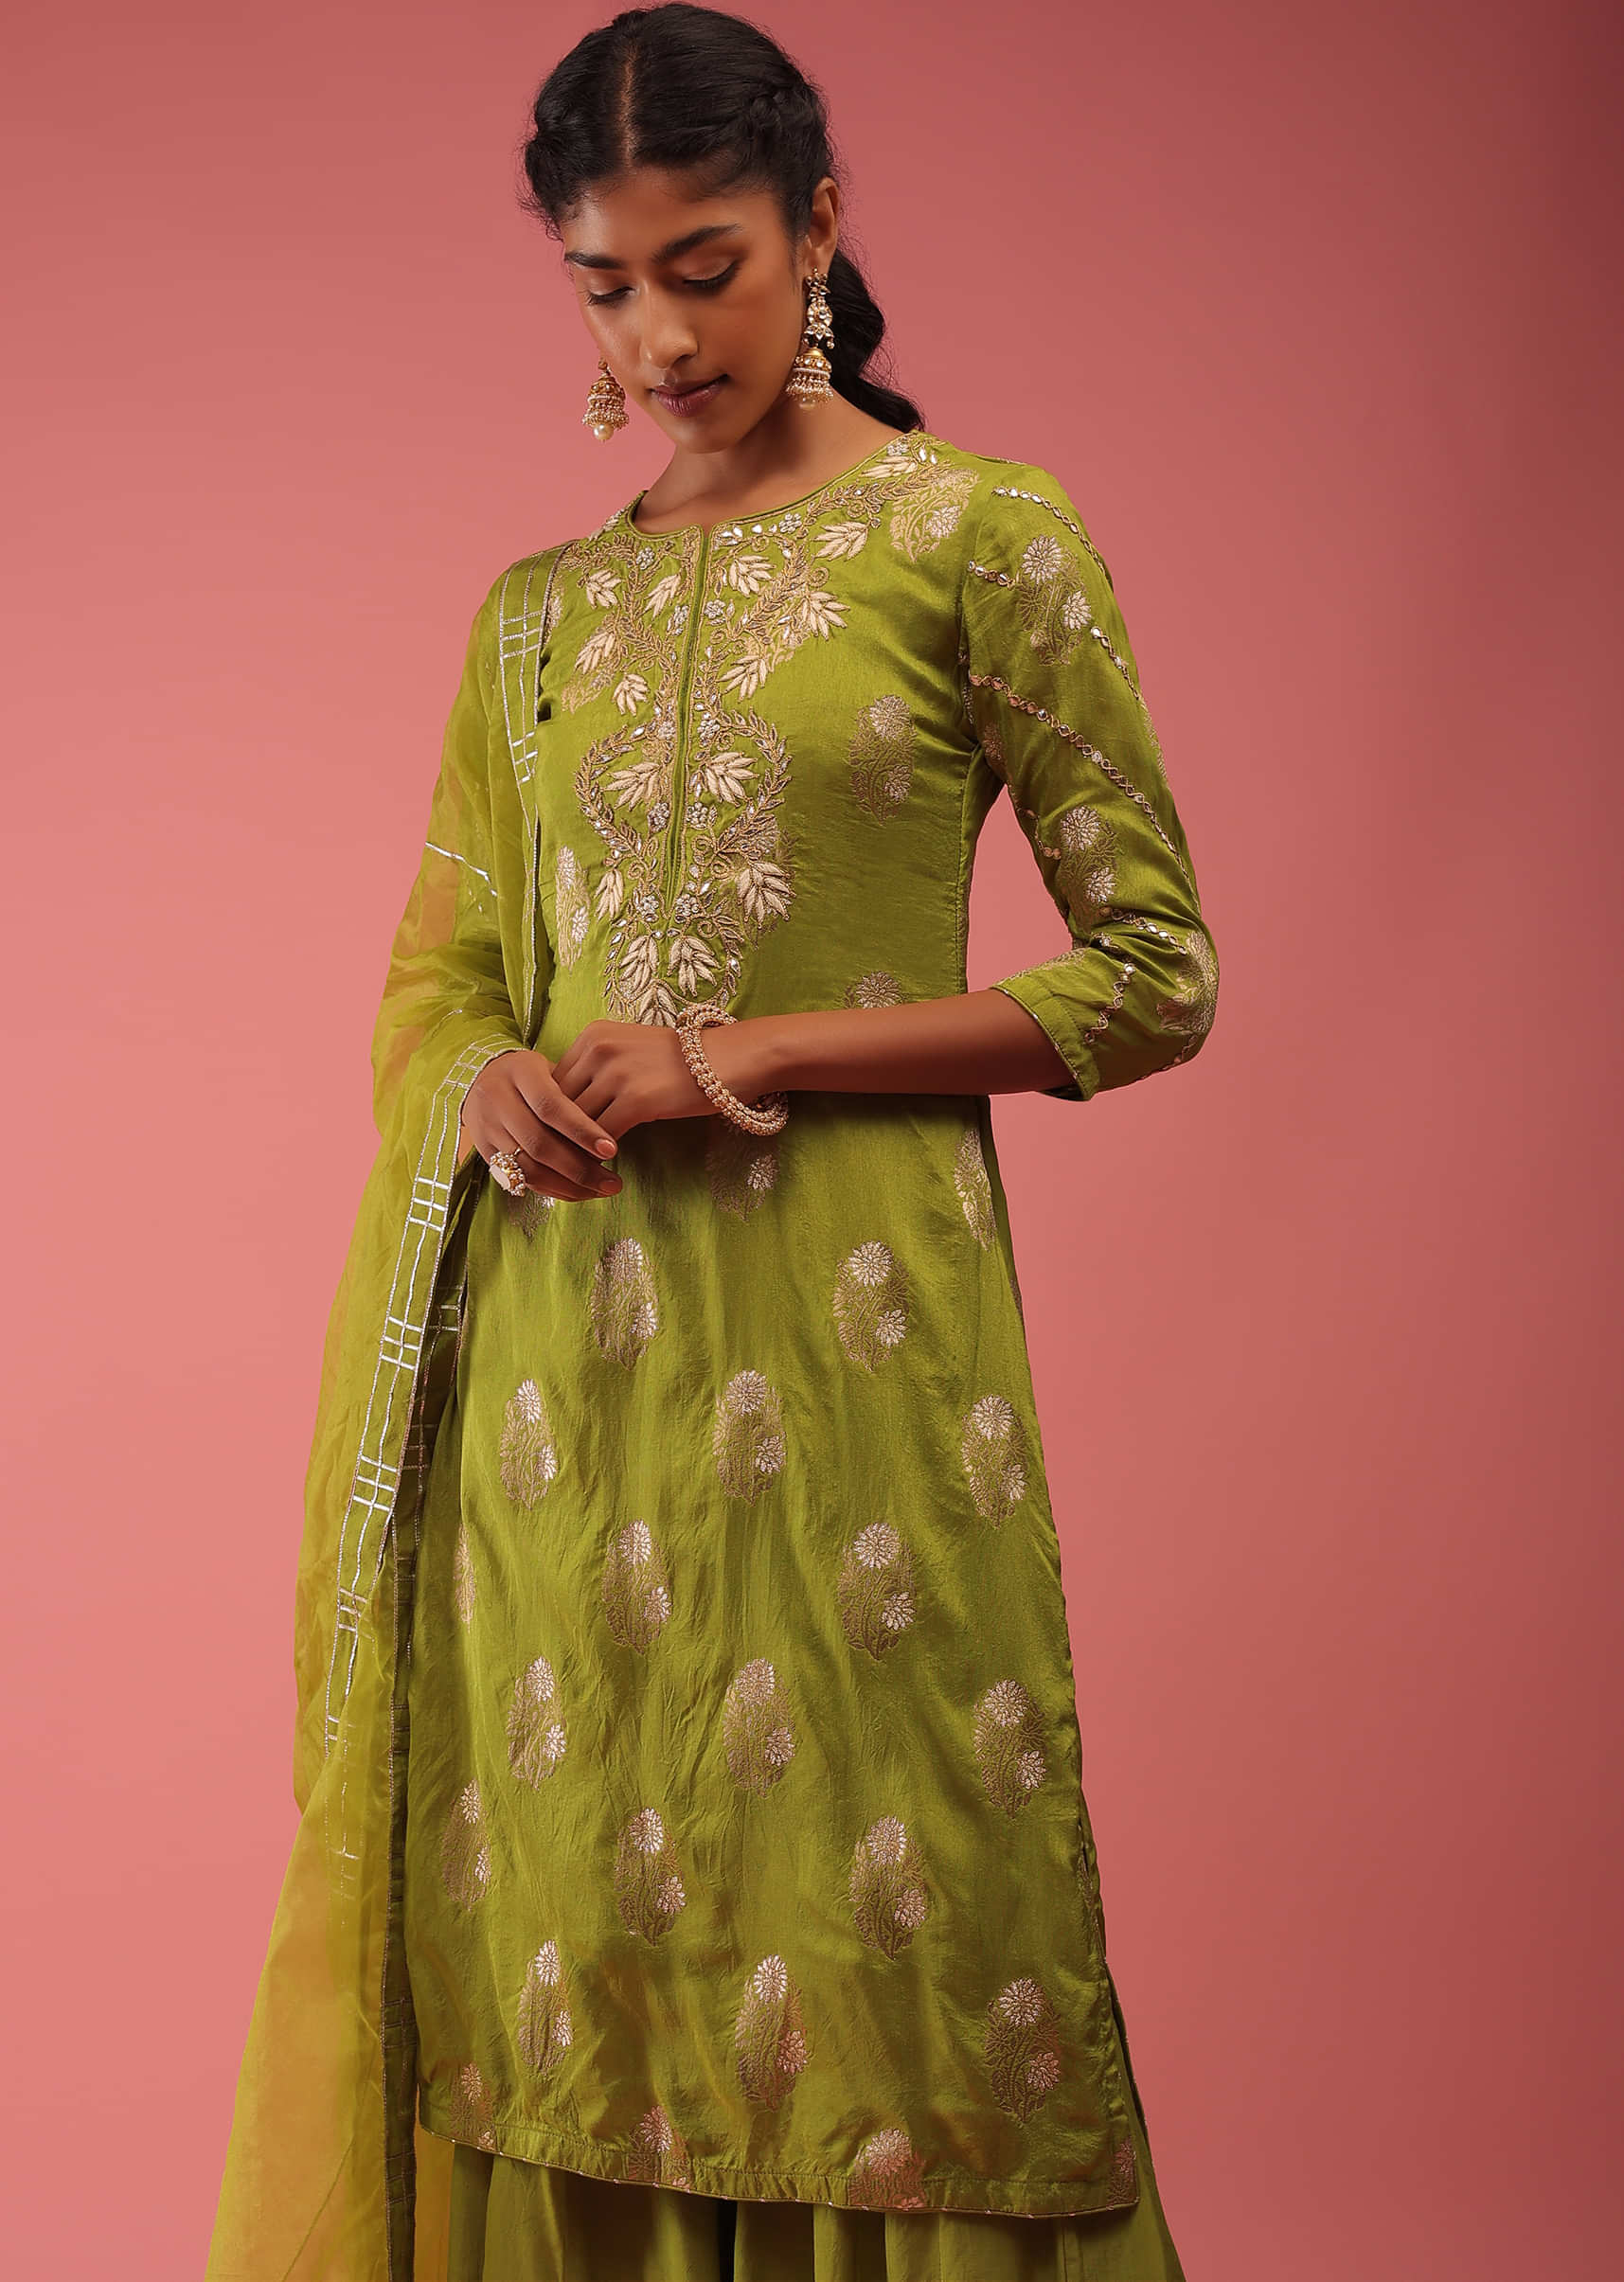 Palm Green Sharara Suit In Golden Zari Embroidery, Crafted In Cotton With Front Hooks Closure On The Yoke